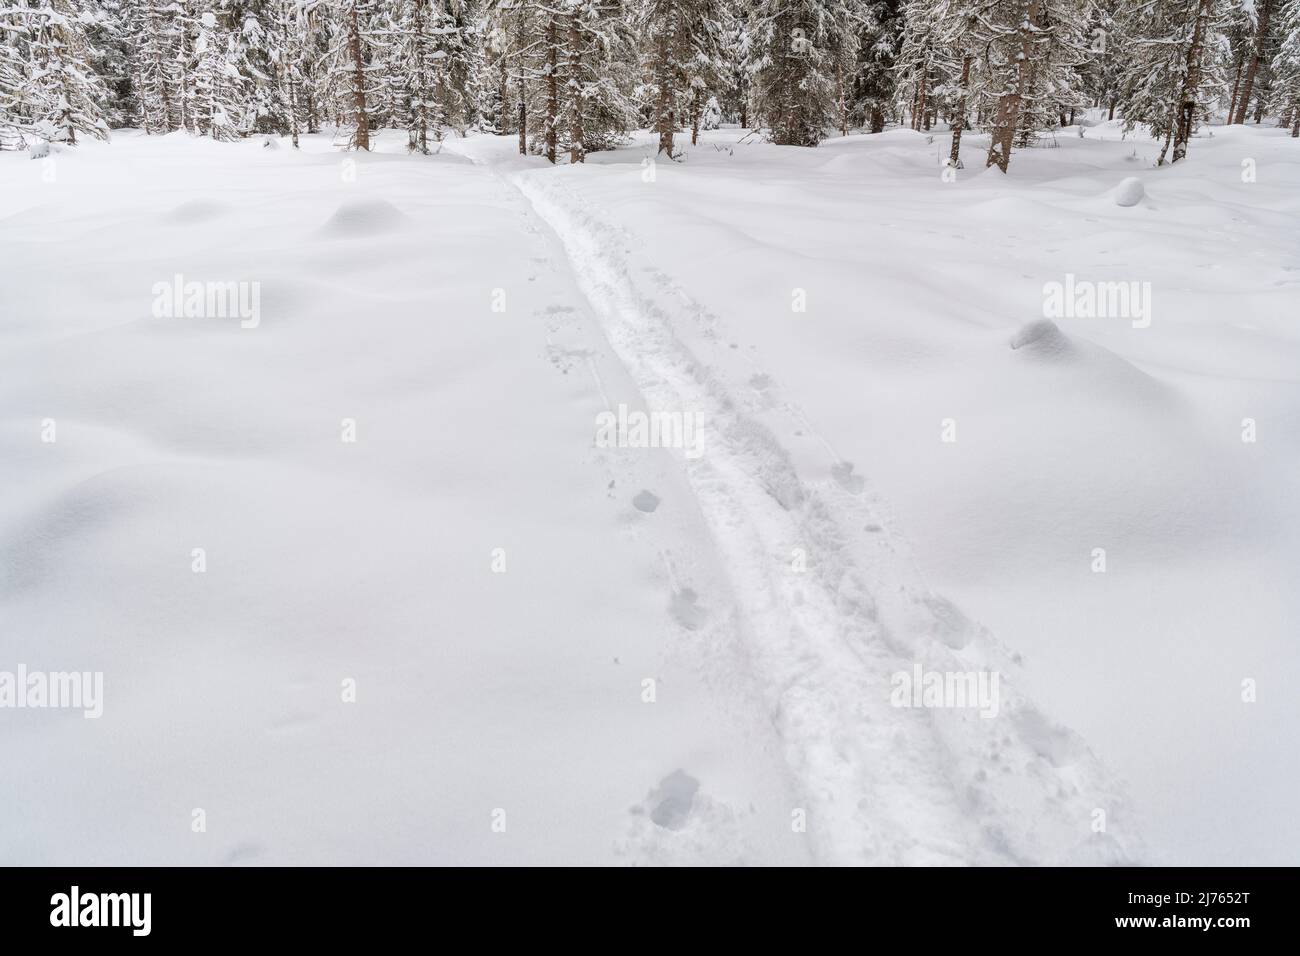 A trail of snowshoes leads across a snowy area towards a coniferous forest with spruce trees. Everything is covered with white snow. Stock Photo